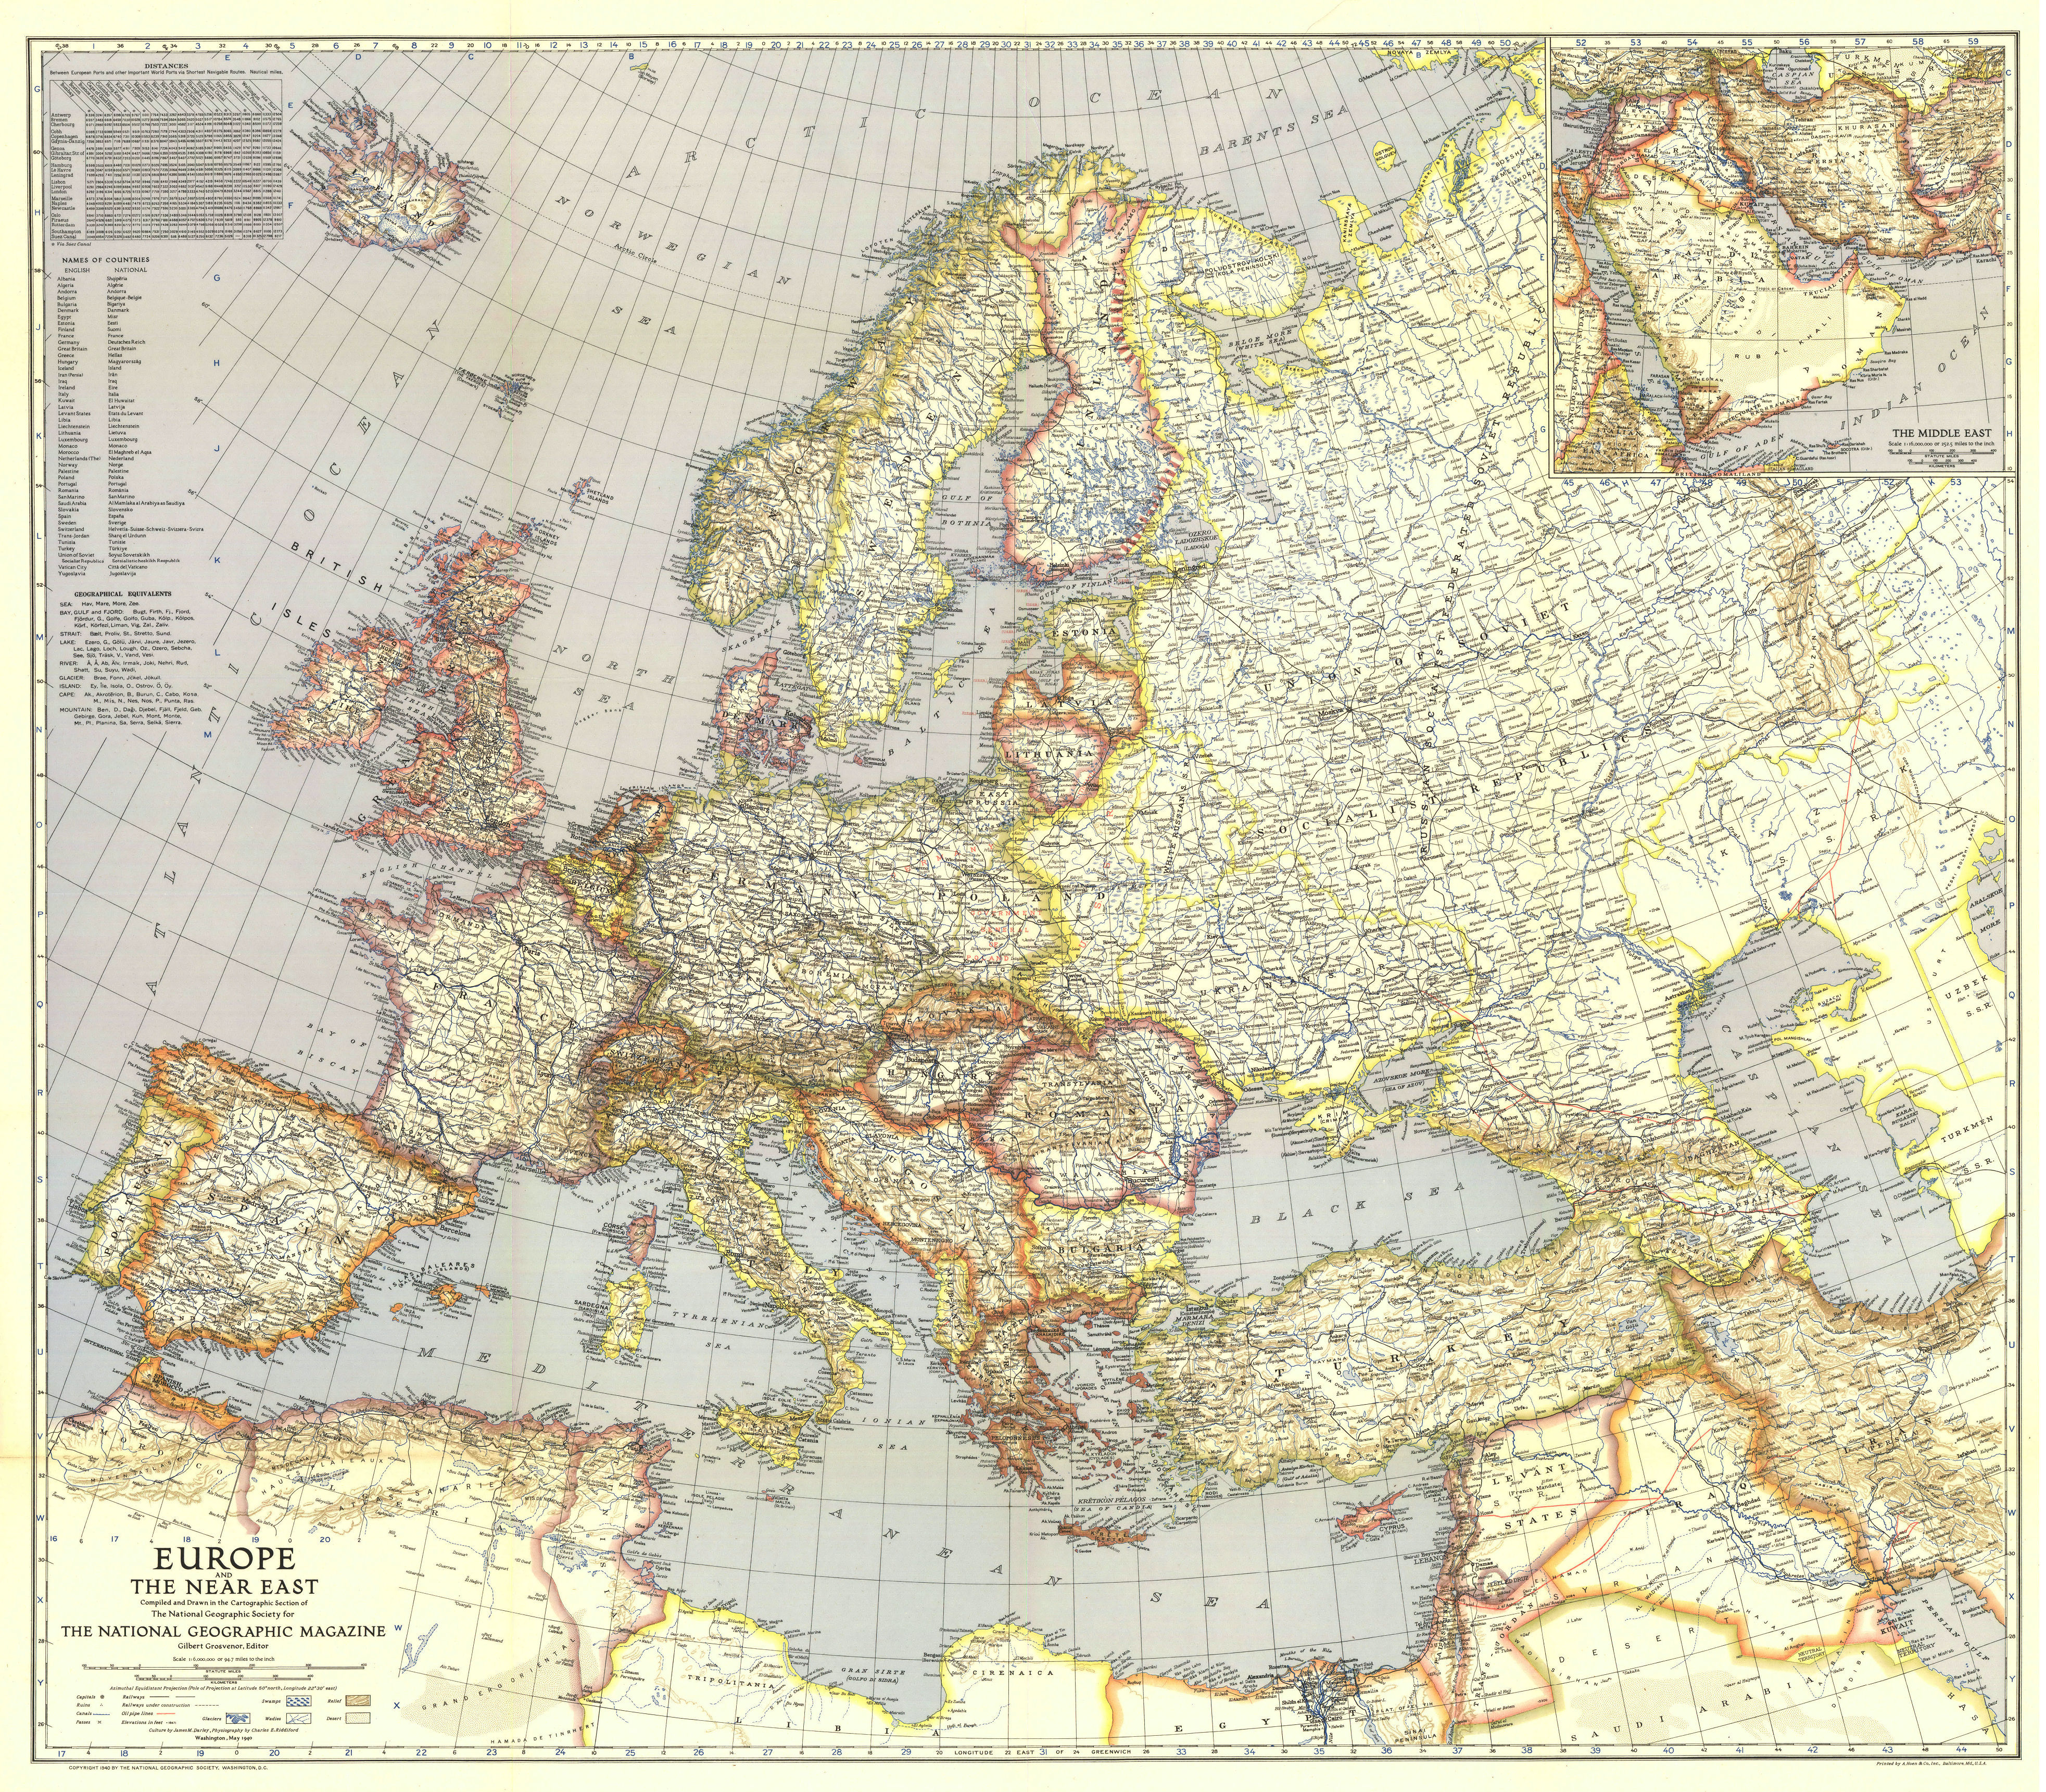 Europe Before and After the World War 2 - Vivid Maps